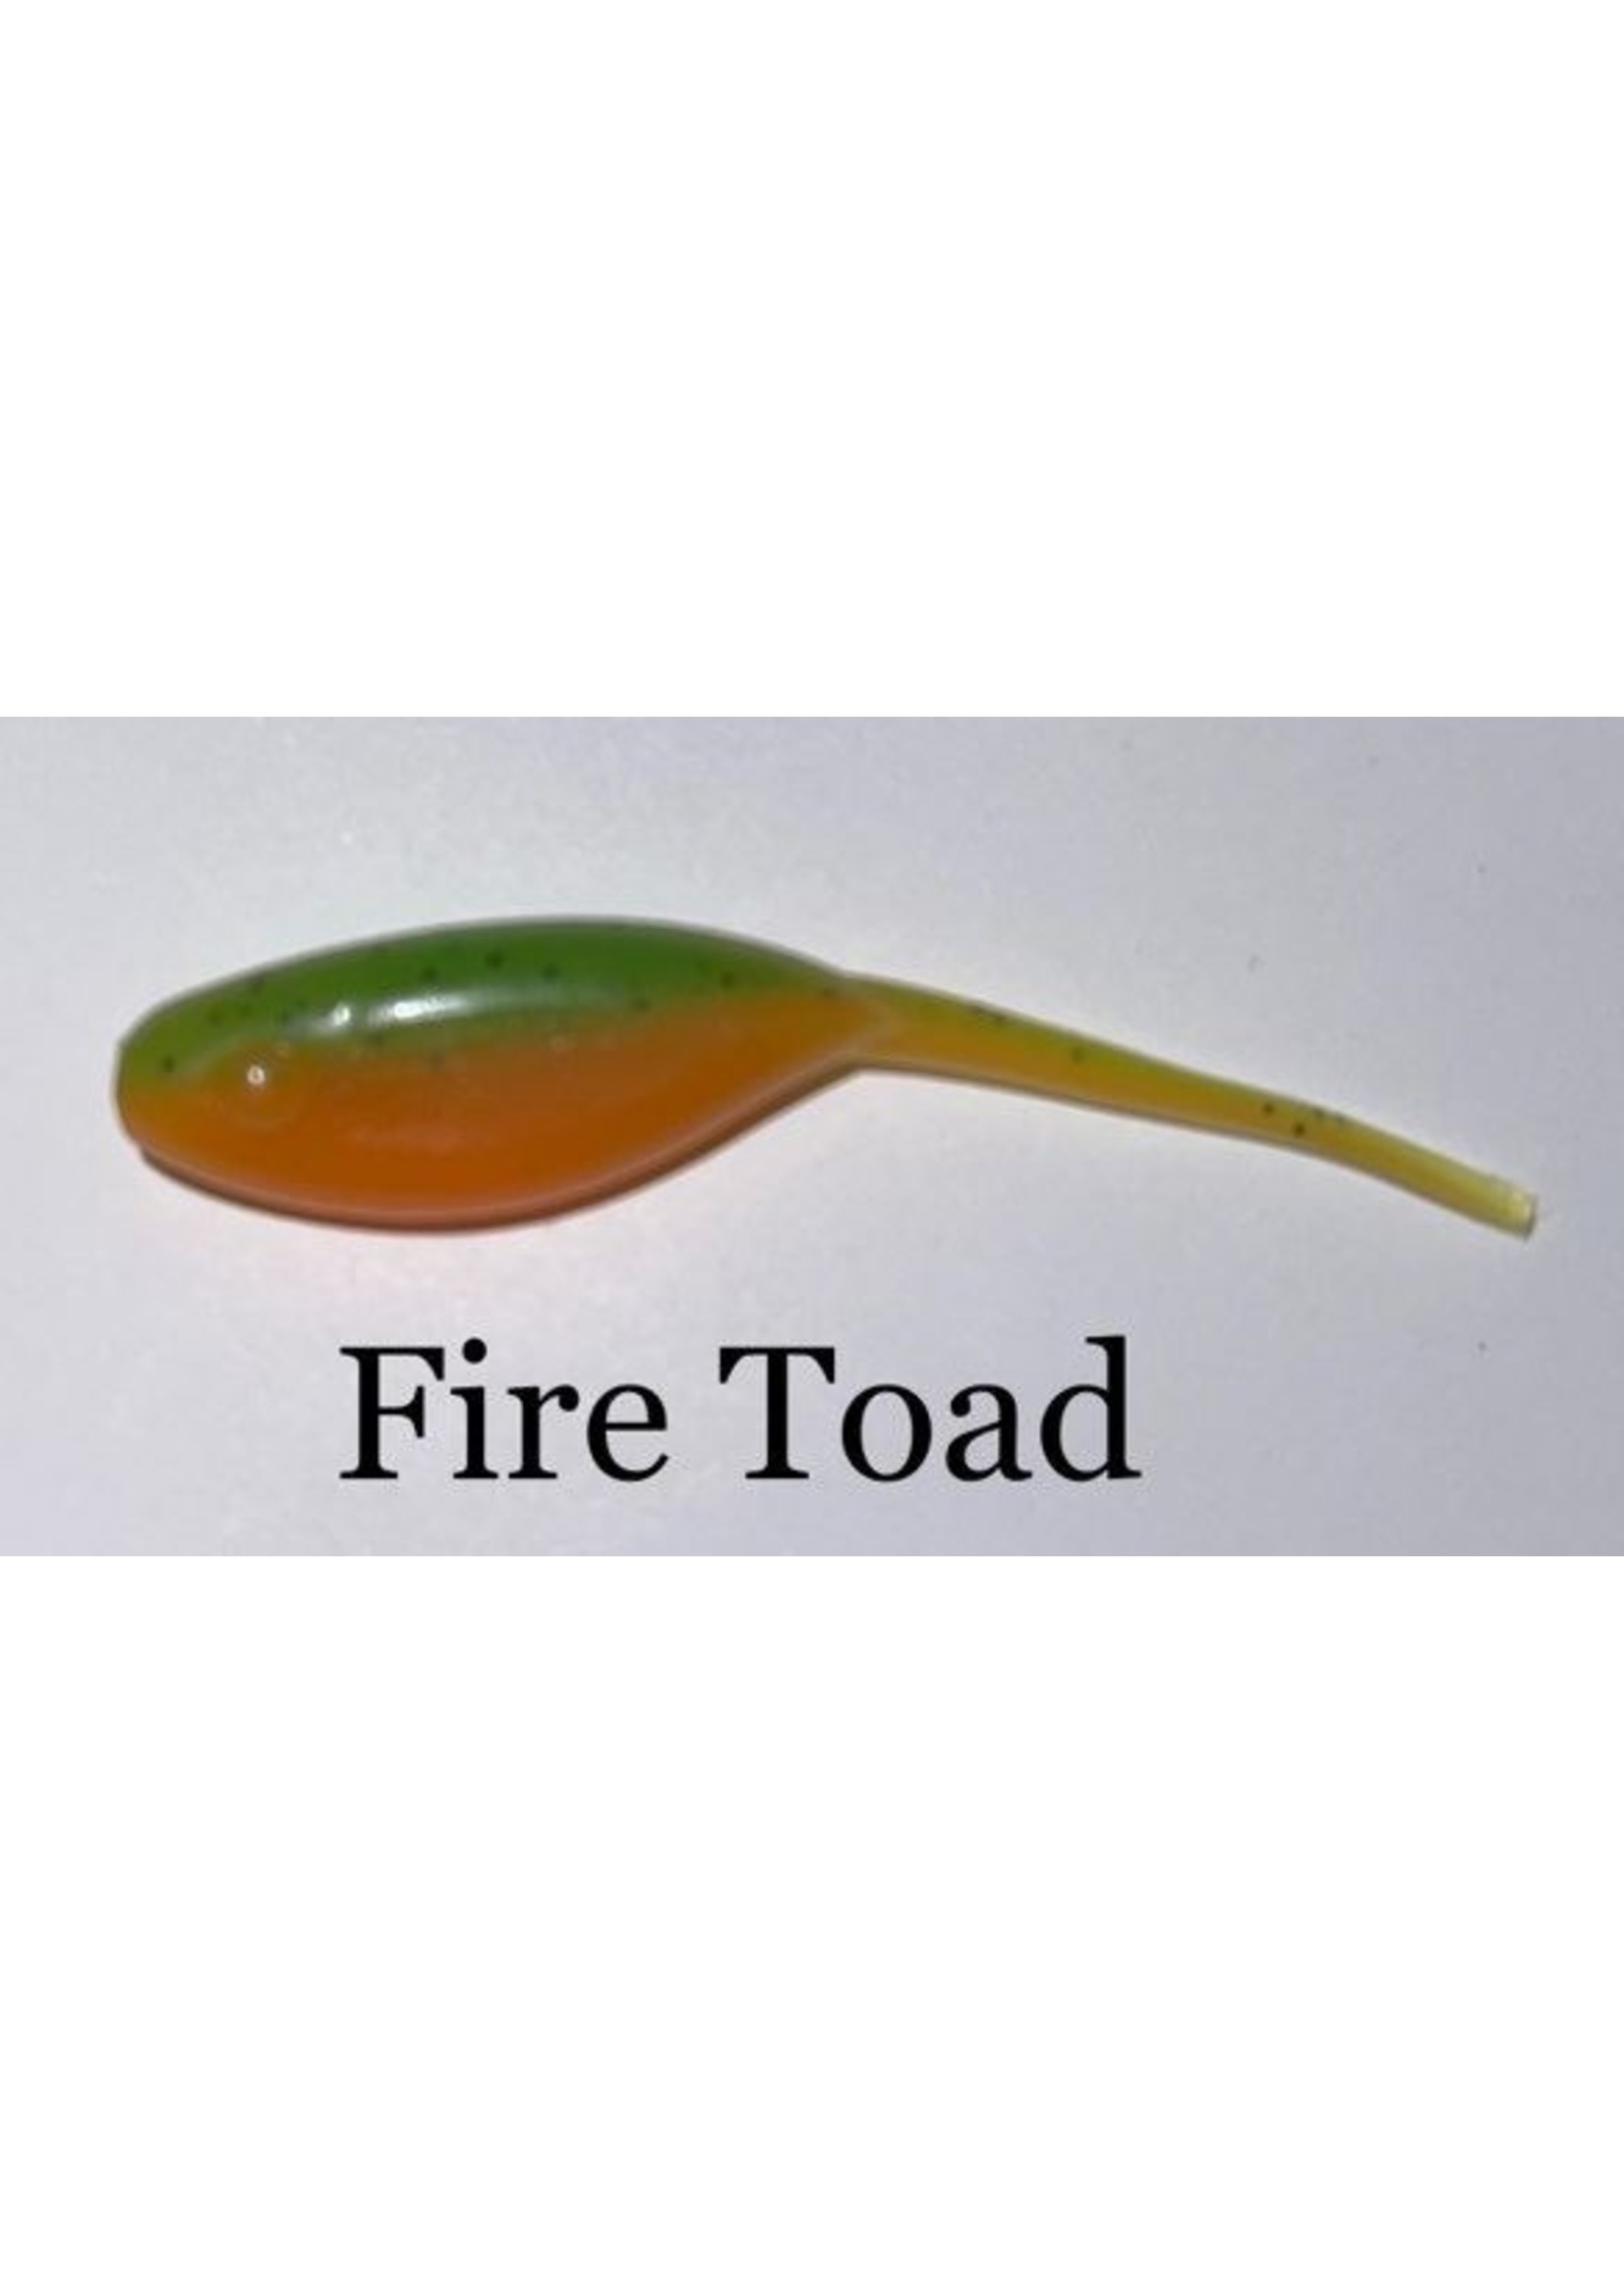 GREEDY BAITS CRAPPIE MINNOWS 10 PCS FIRE TOAD